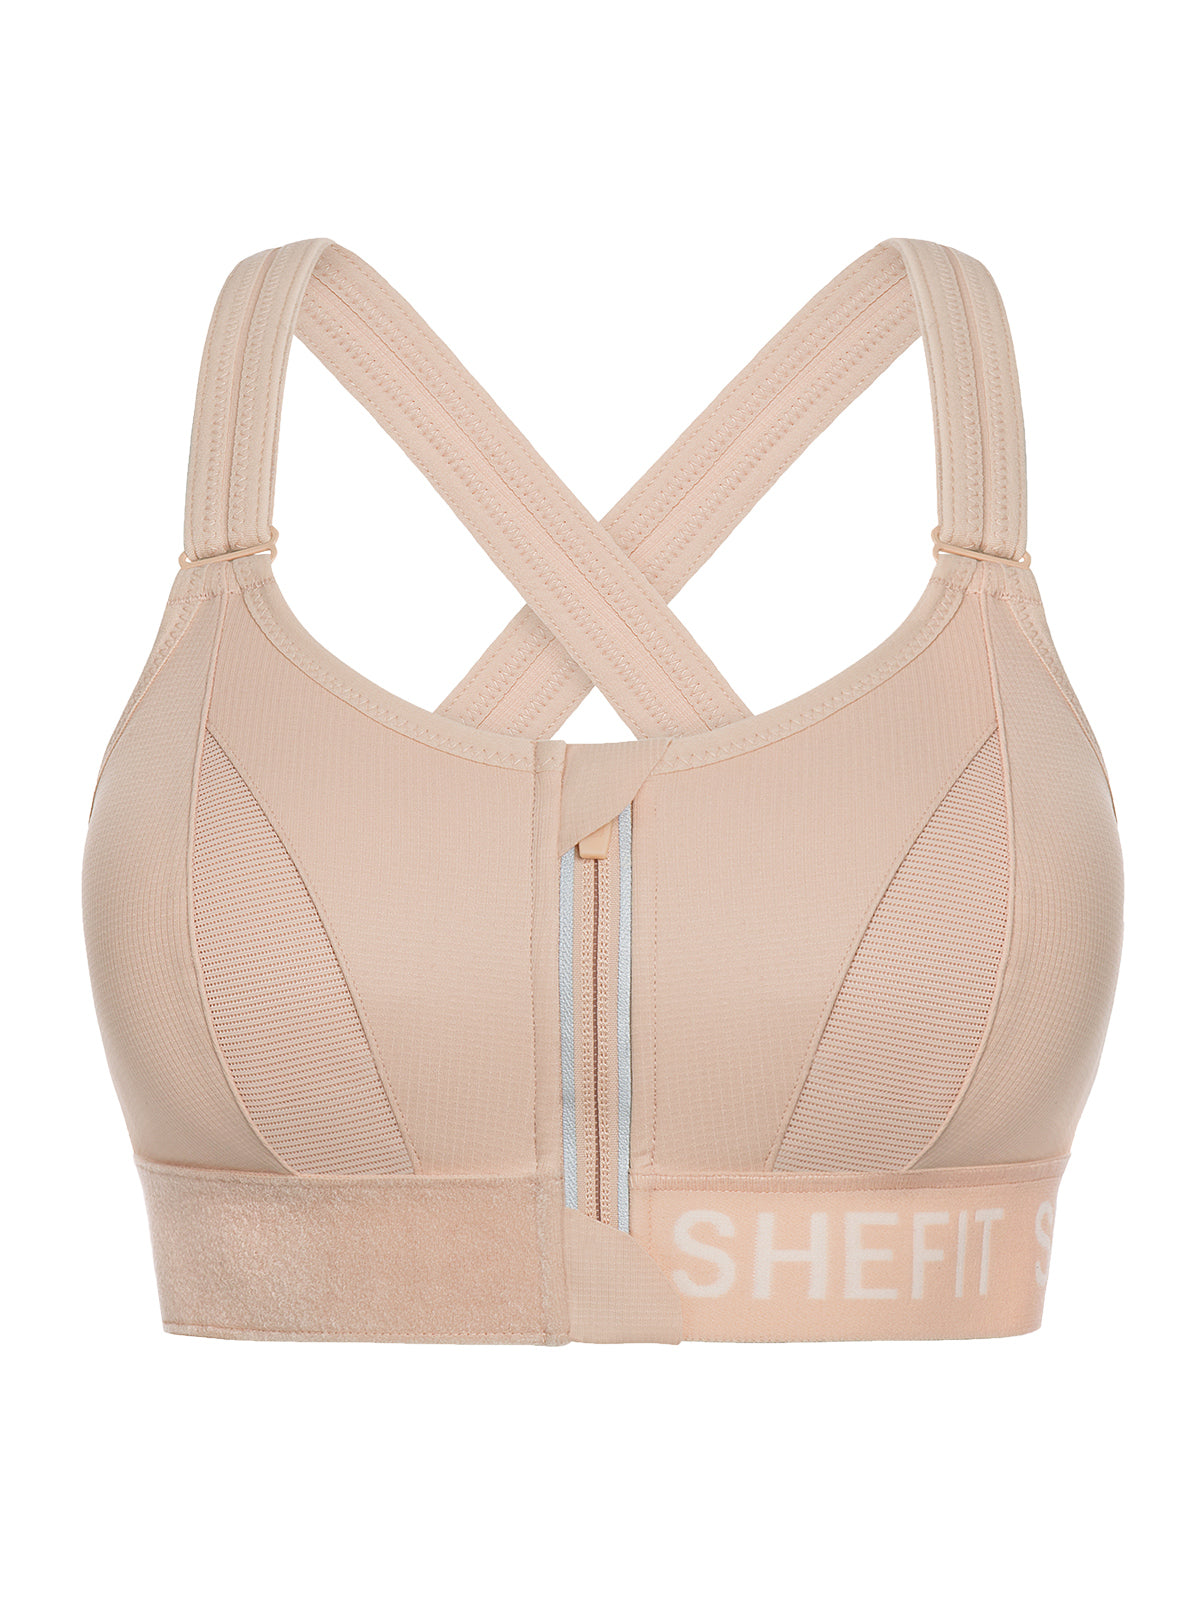 SHEFIT sports pink / golden colors bra. Size 2 luxe. NWOT . Sold